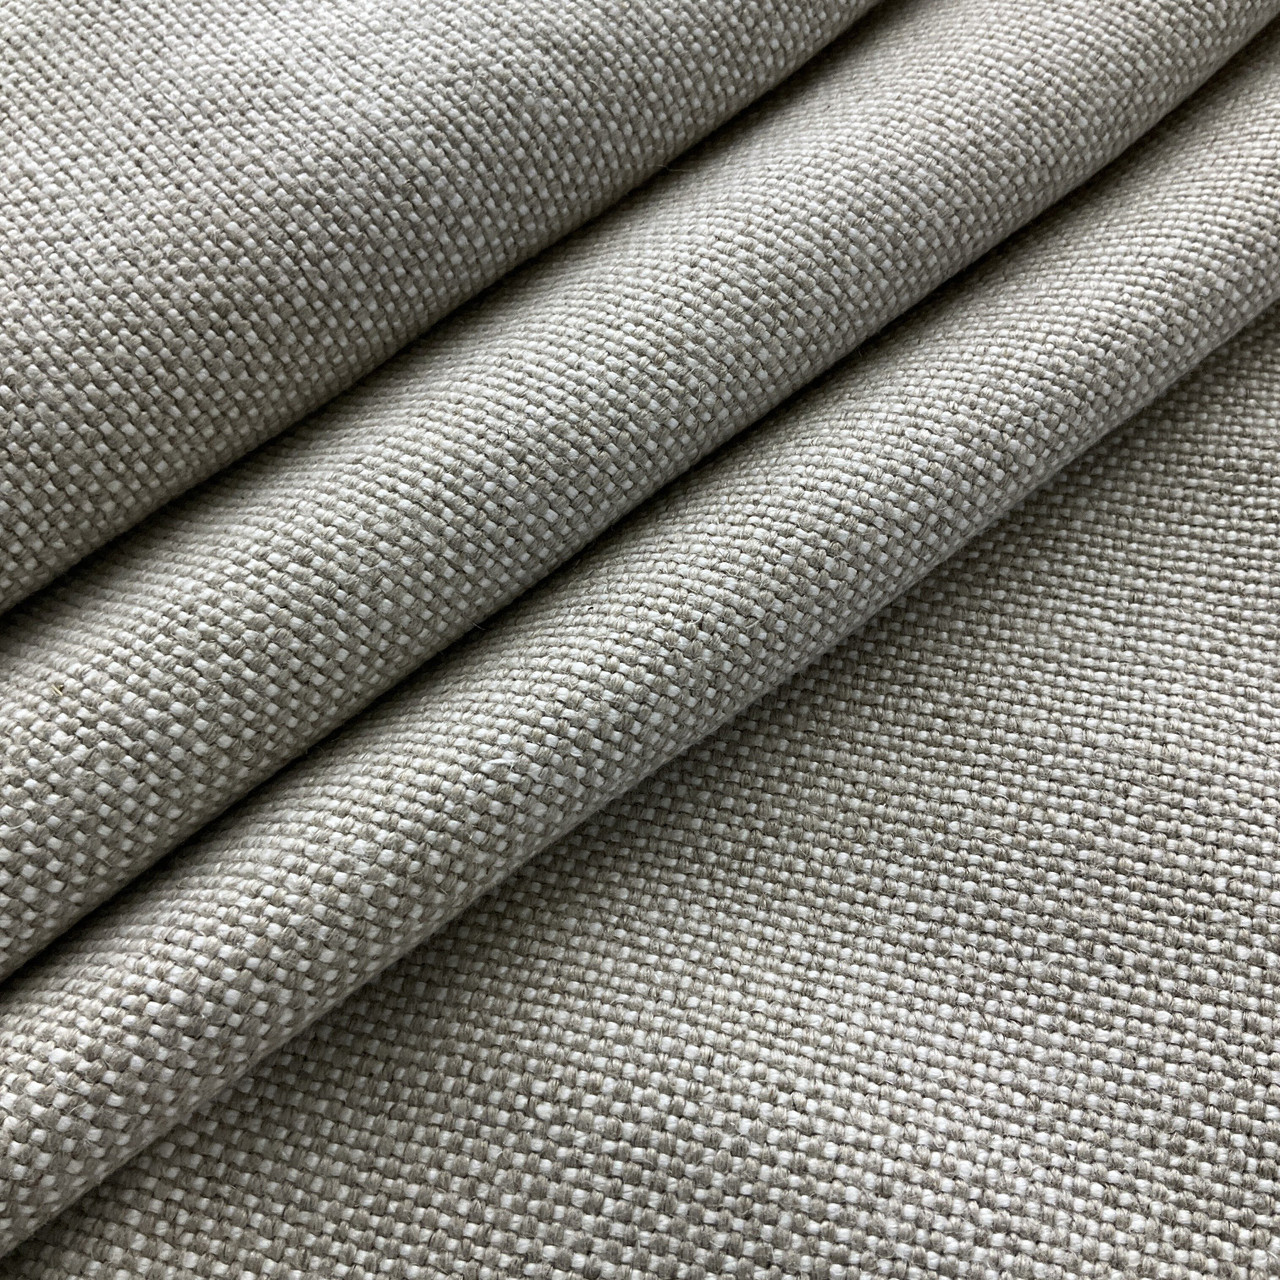 Extra Wide 100% Linen Fabric - Soft Linen Material for Home Decor